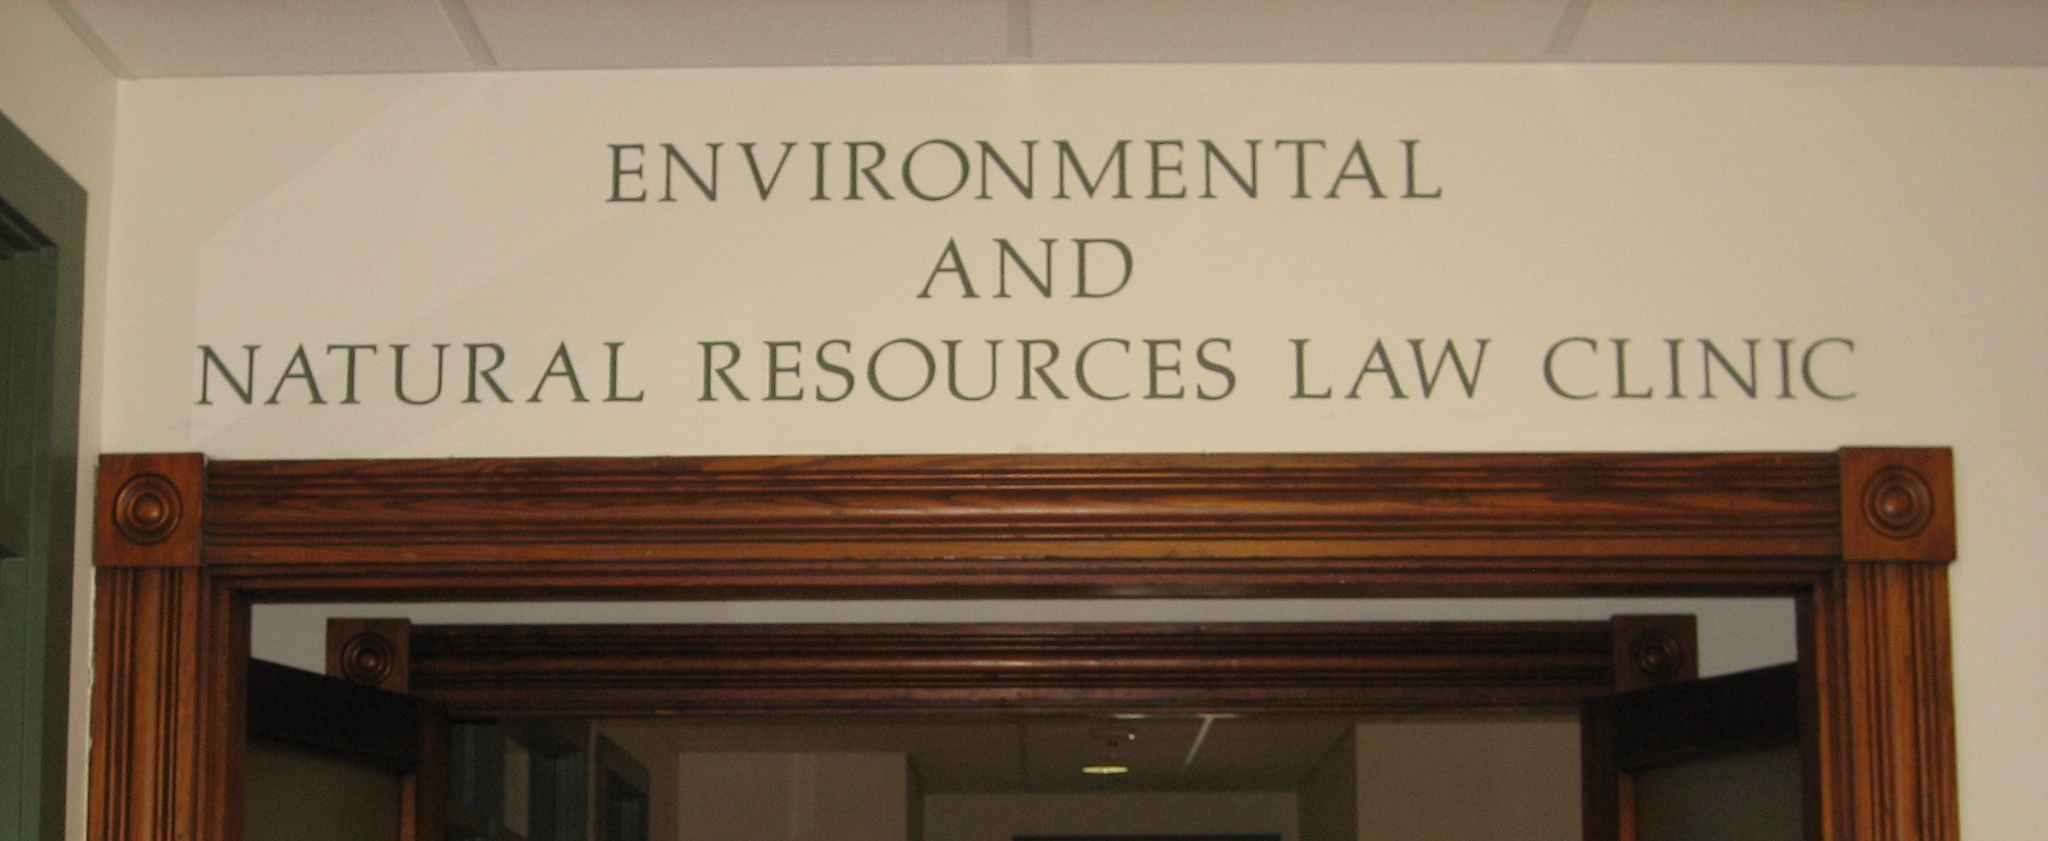 The Environmental and Natural Resources Law Clinic opening its doors in 2003